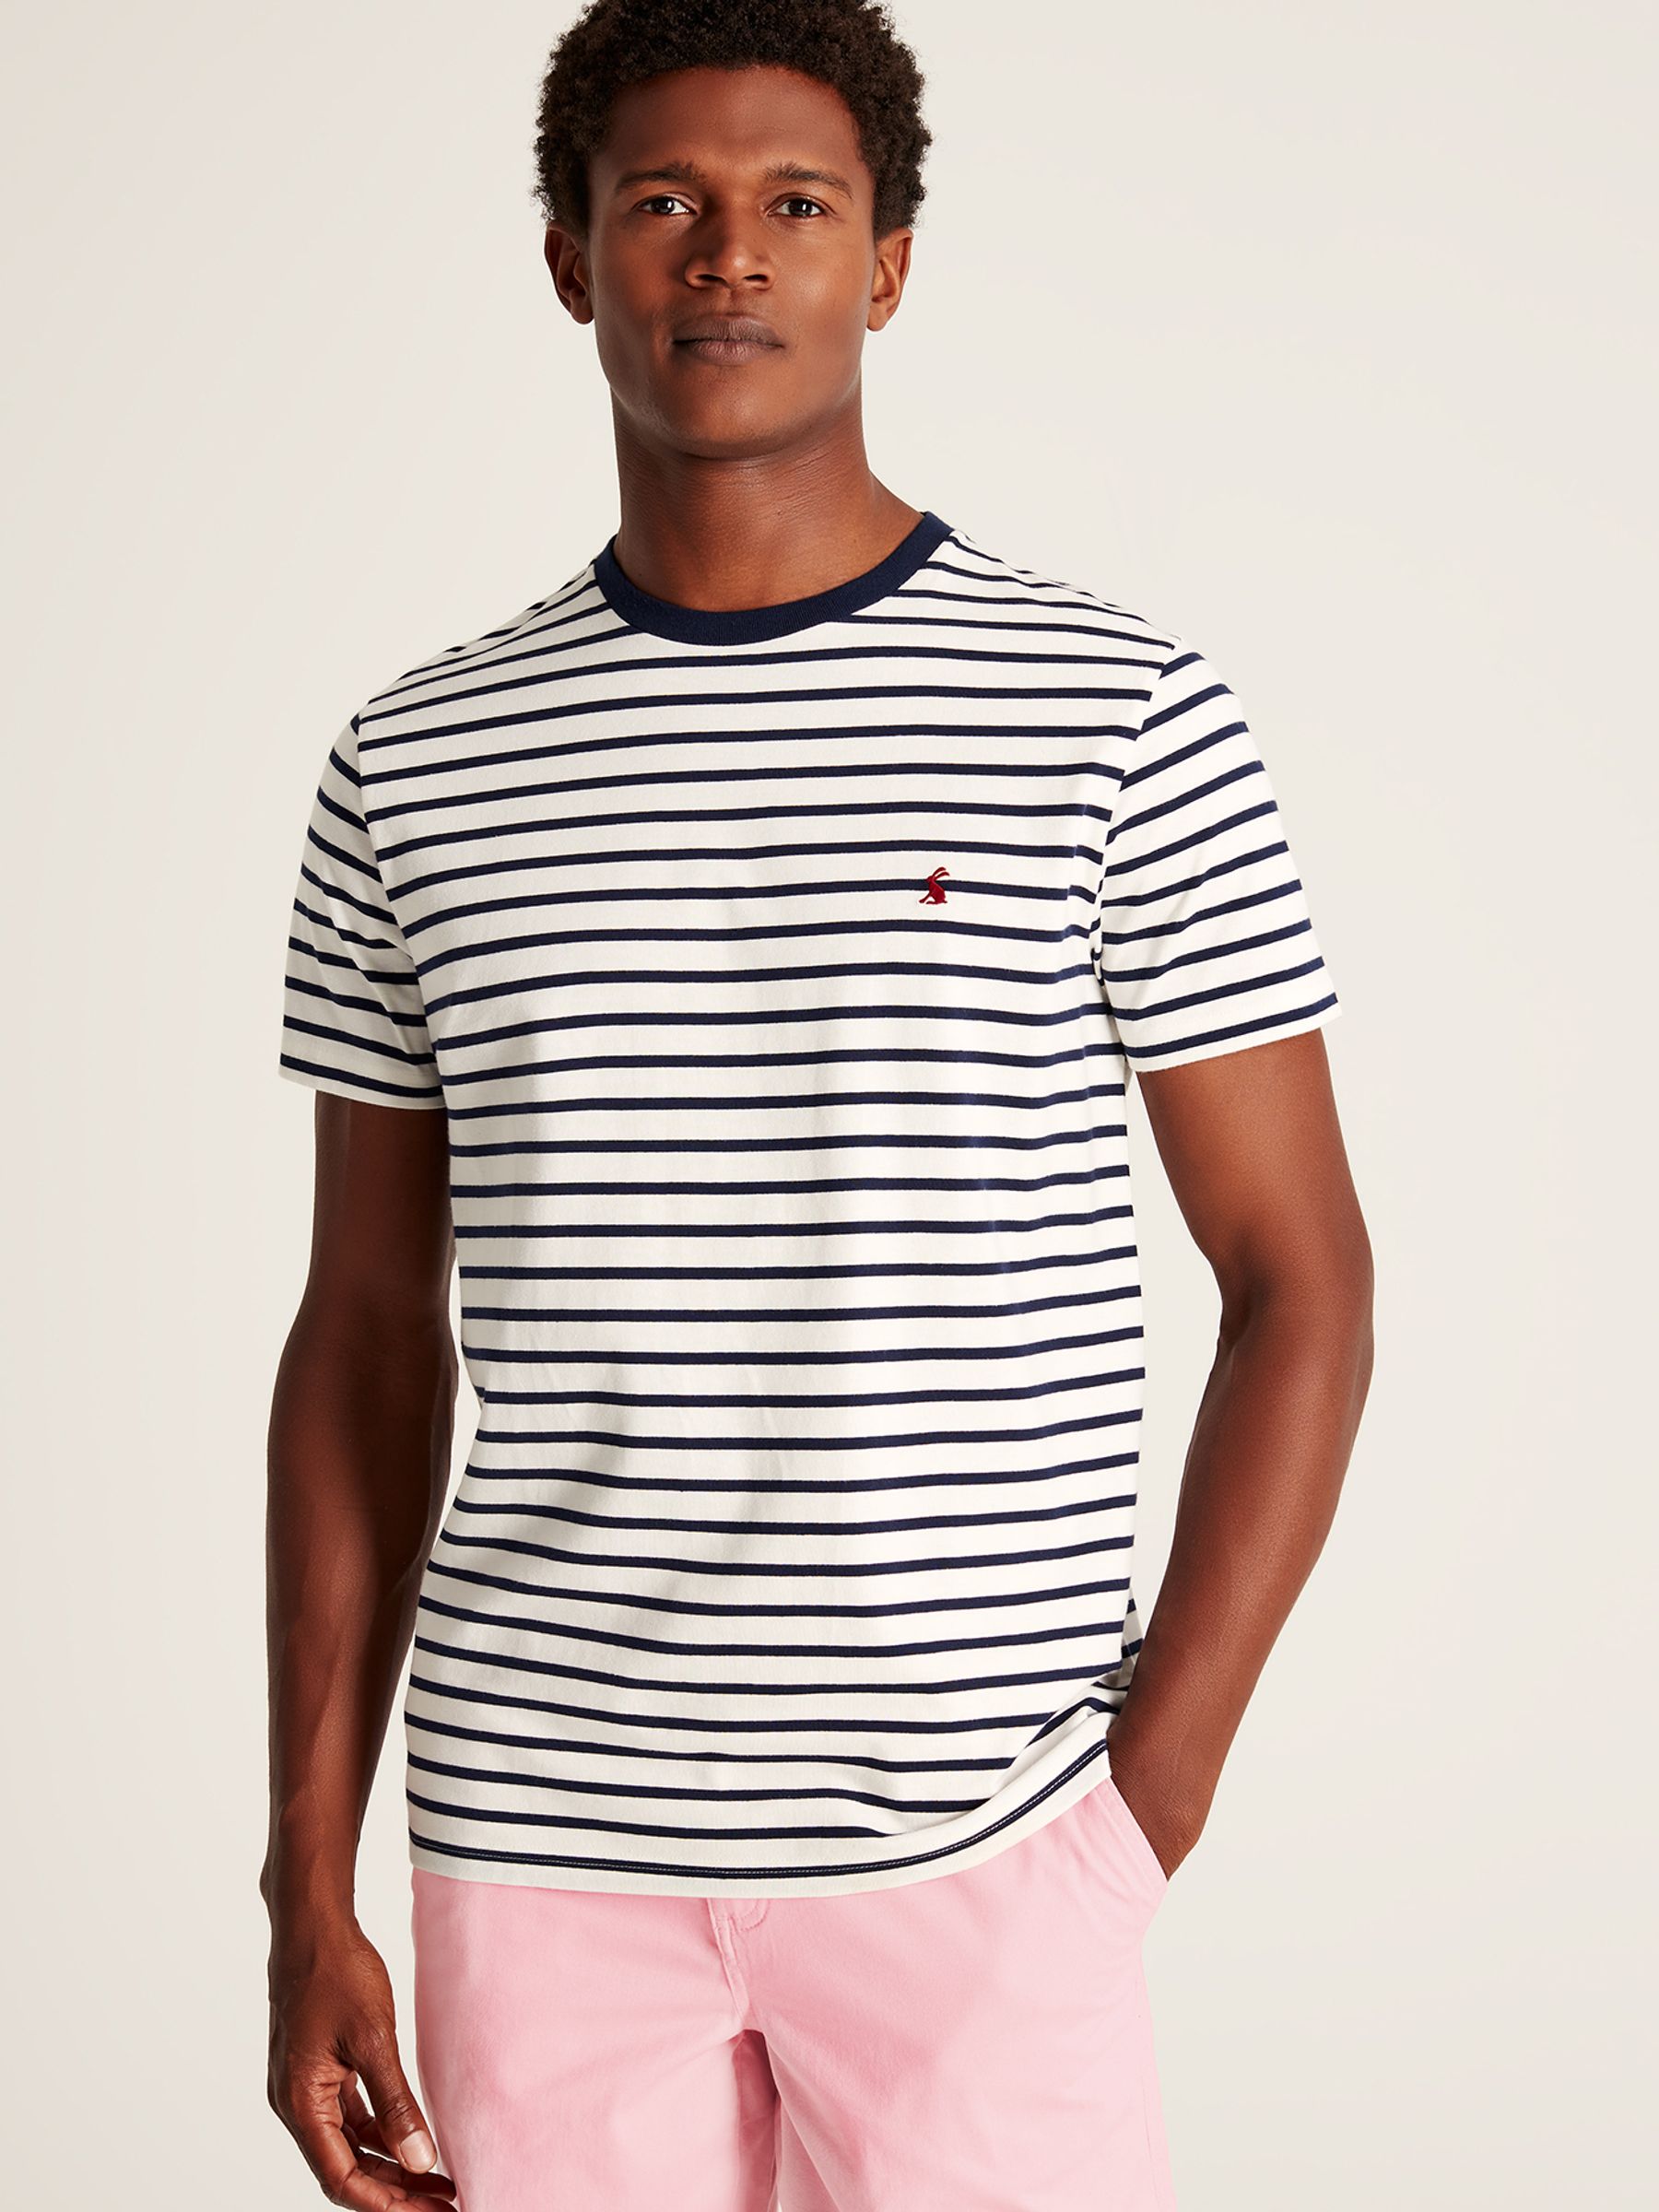 Buy Joules Boathouse Jersey Crew Neck T-Shirt from the Joules online shop